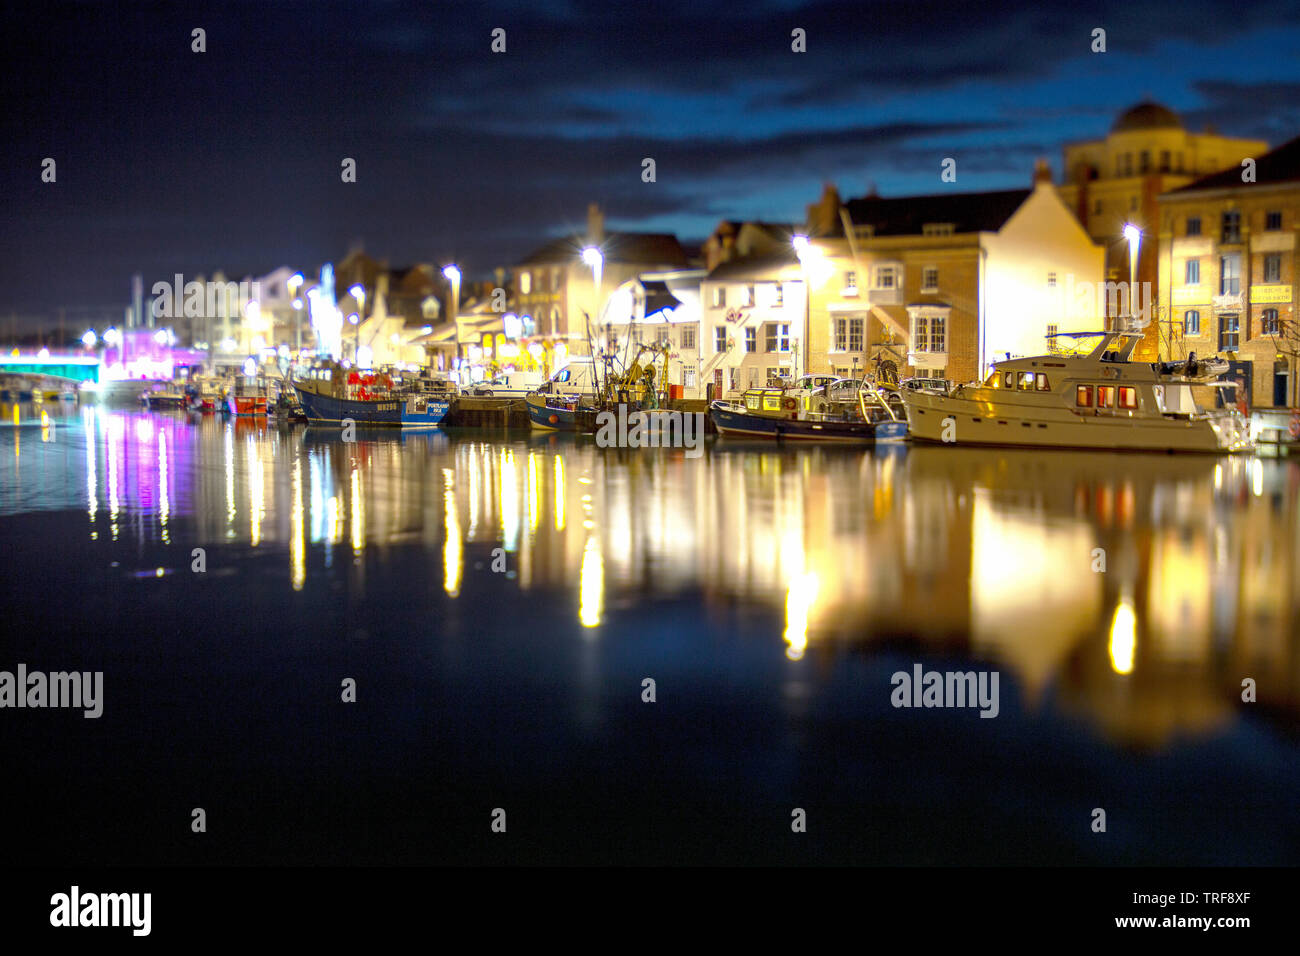 A  shot taken at night  with a lensbaby lens of boats moored alongside Weymouth Harbour in Dorset England Stock Photo